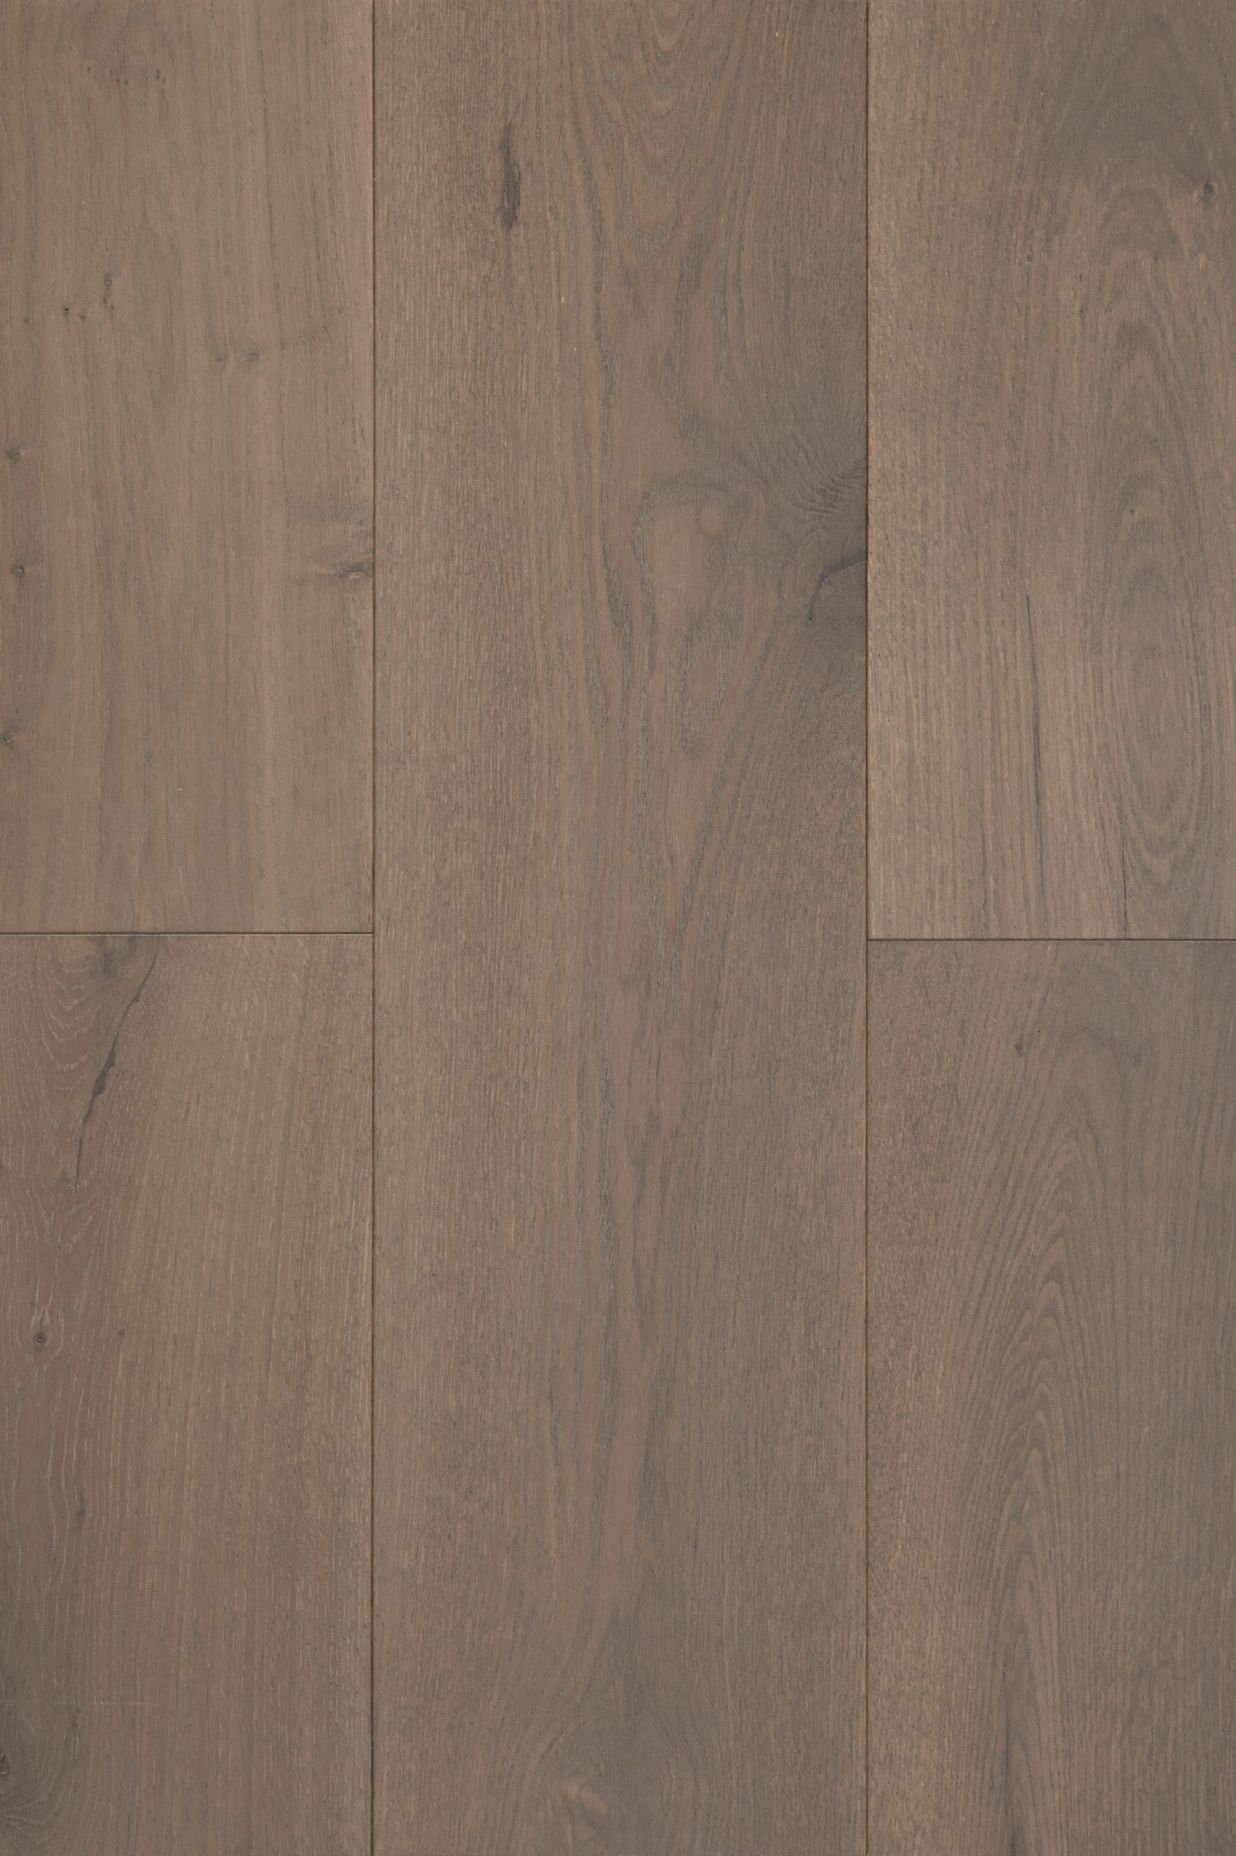 The Forté Indus Patagonia Plank.